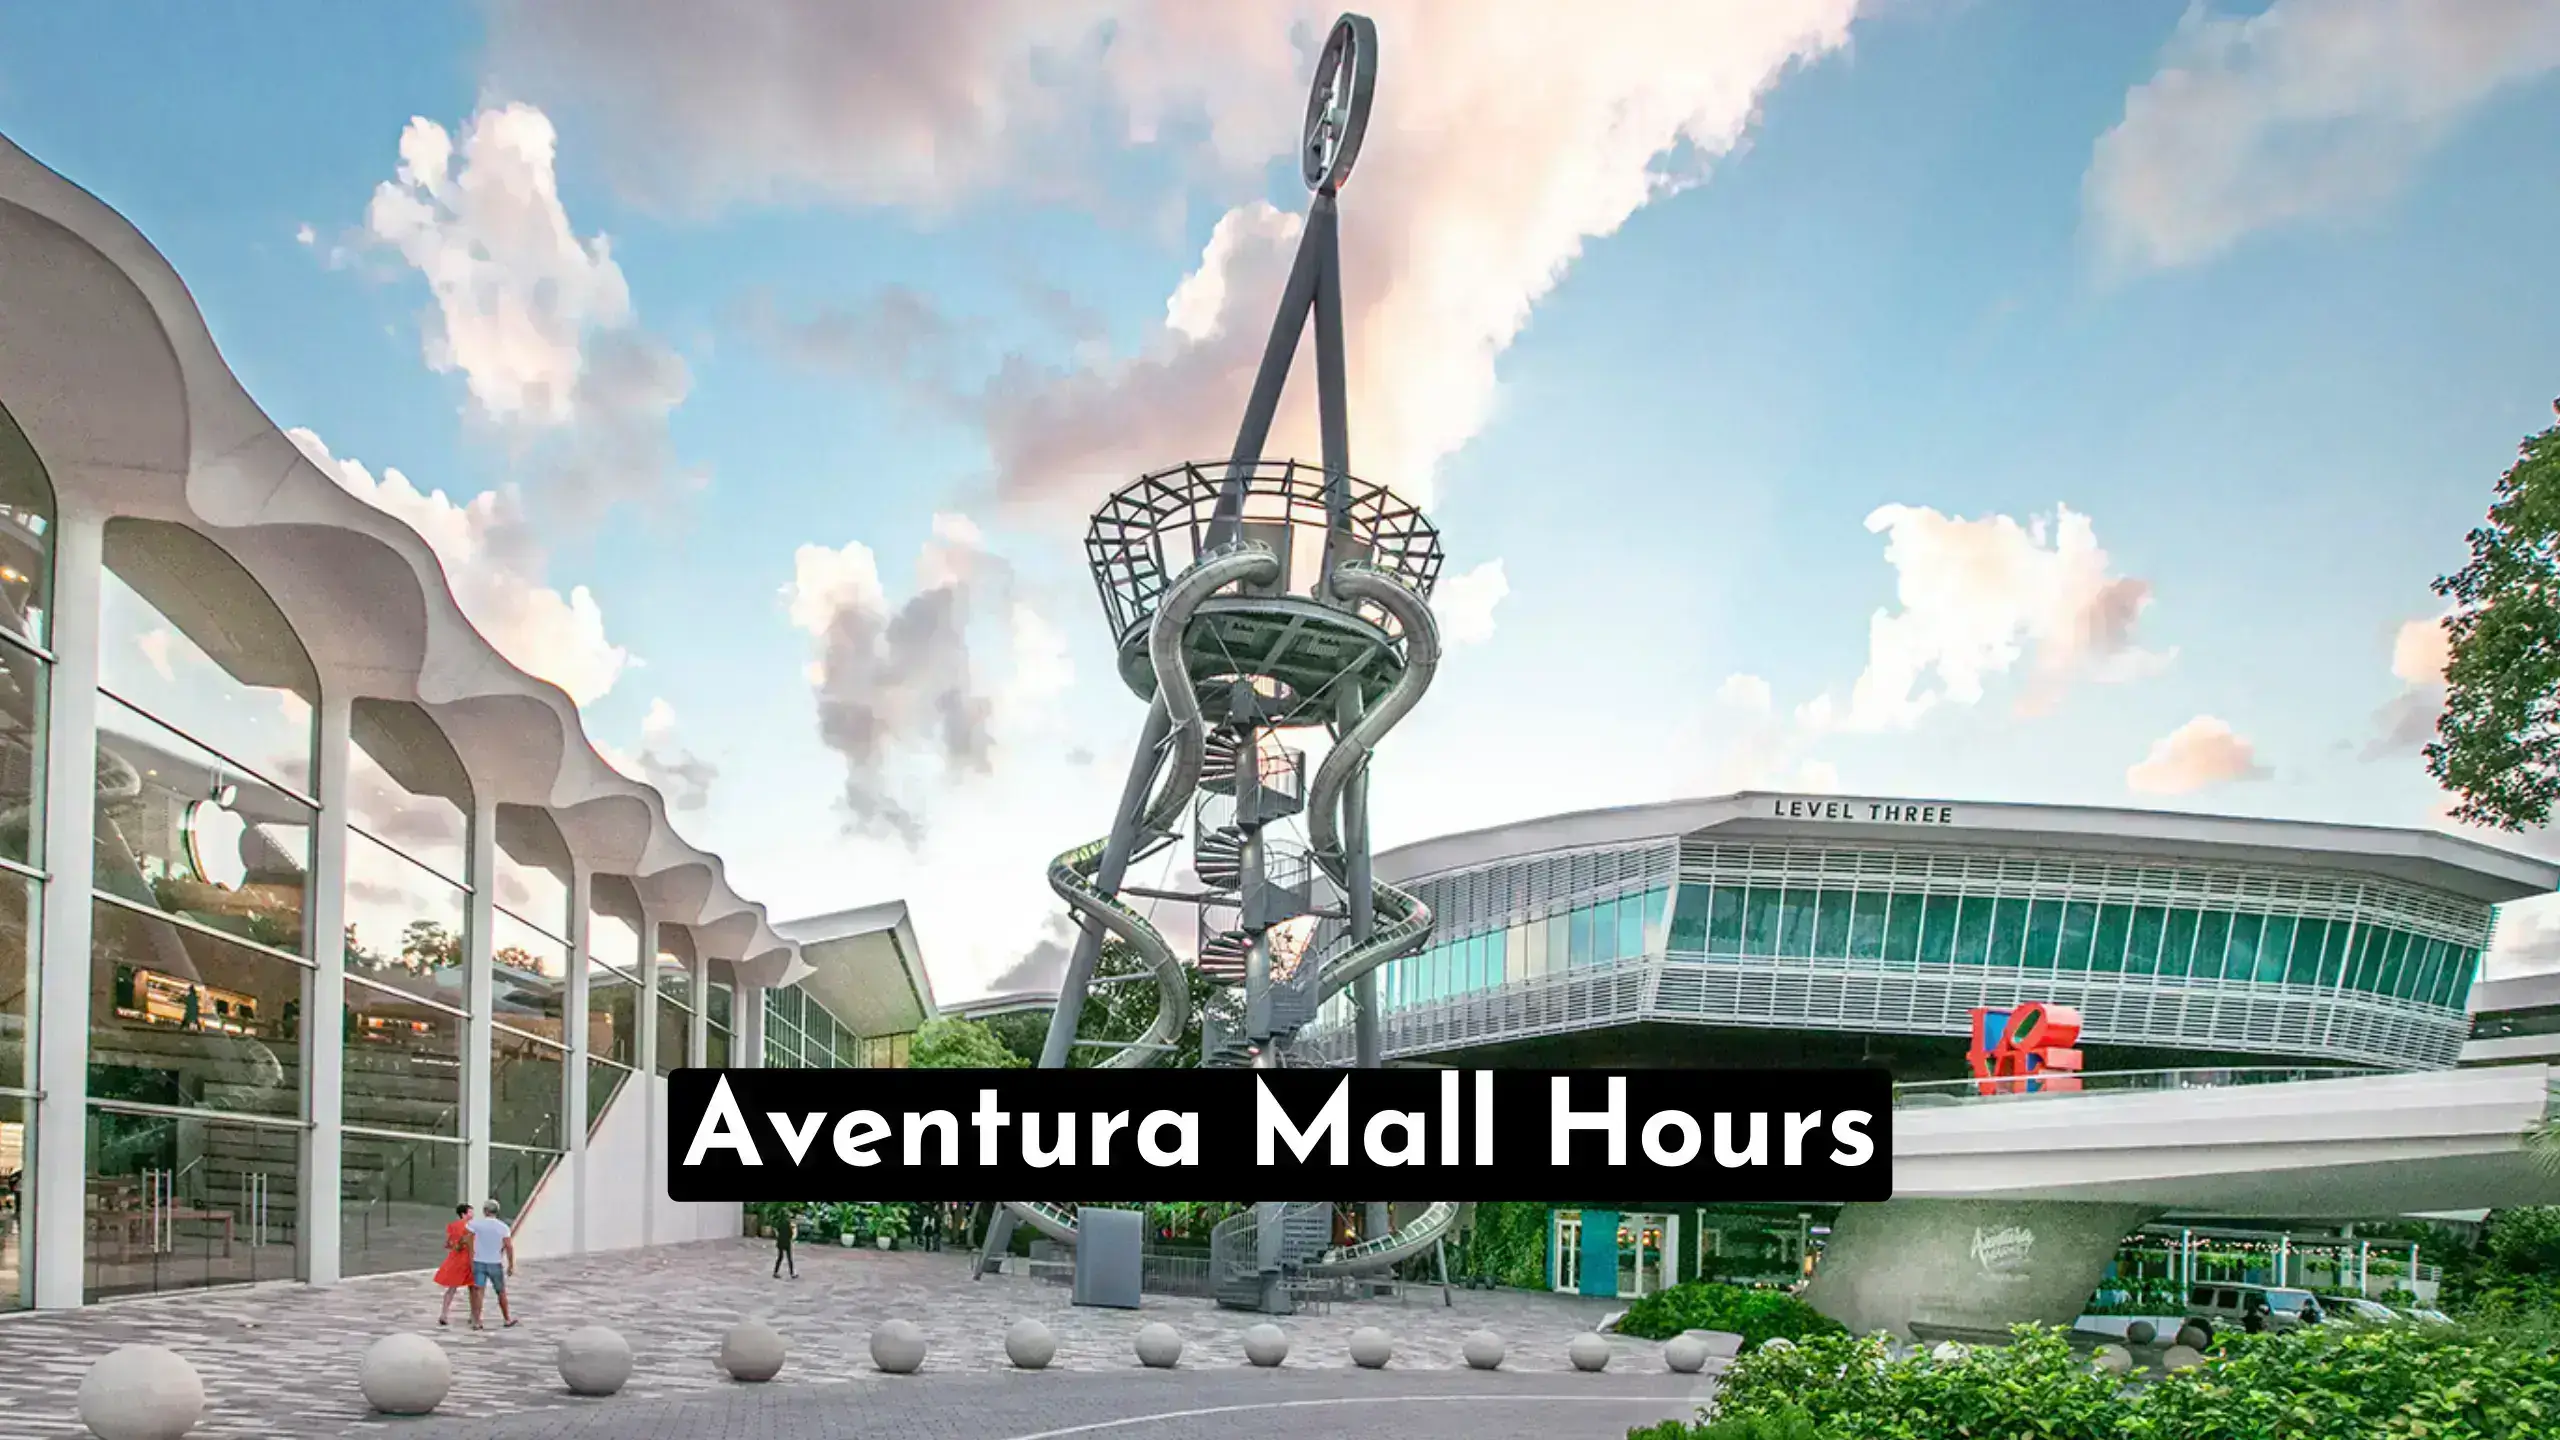 Discover the best time to visit Aventura Mall in 2023! From luxury shopping to dining & entertainment, explore Aventura Mall hours and plan your trip.